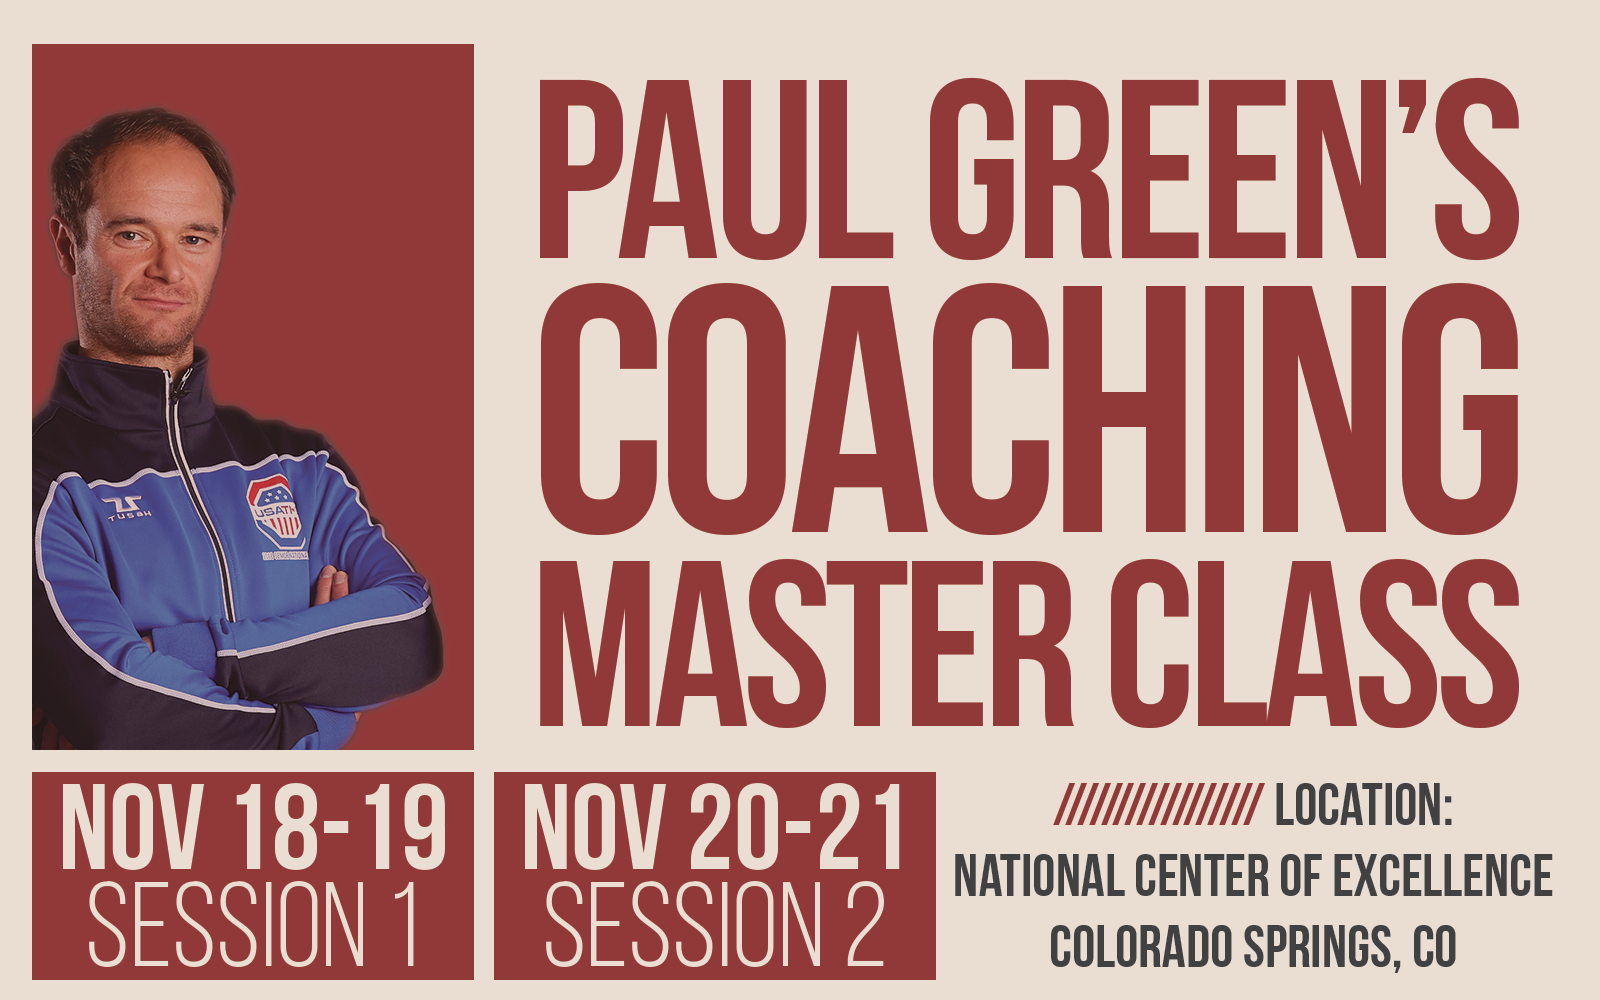 USA Taekwondo hold two-session coaching master class in Colorado Springs